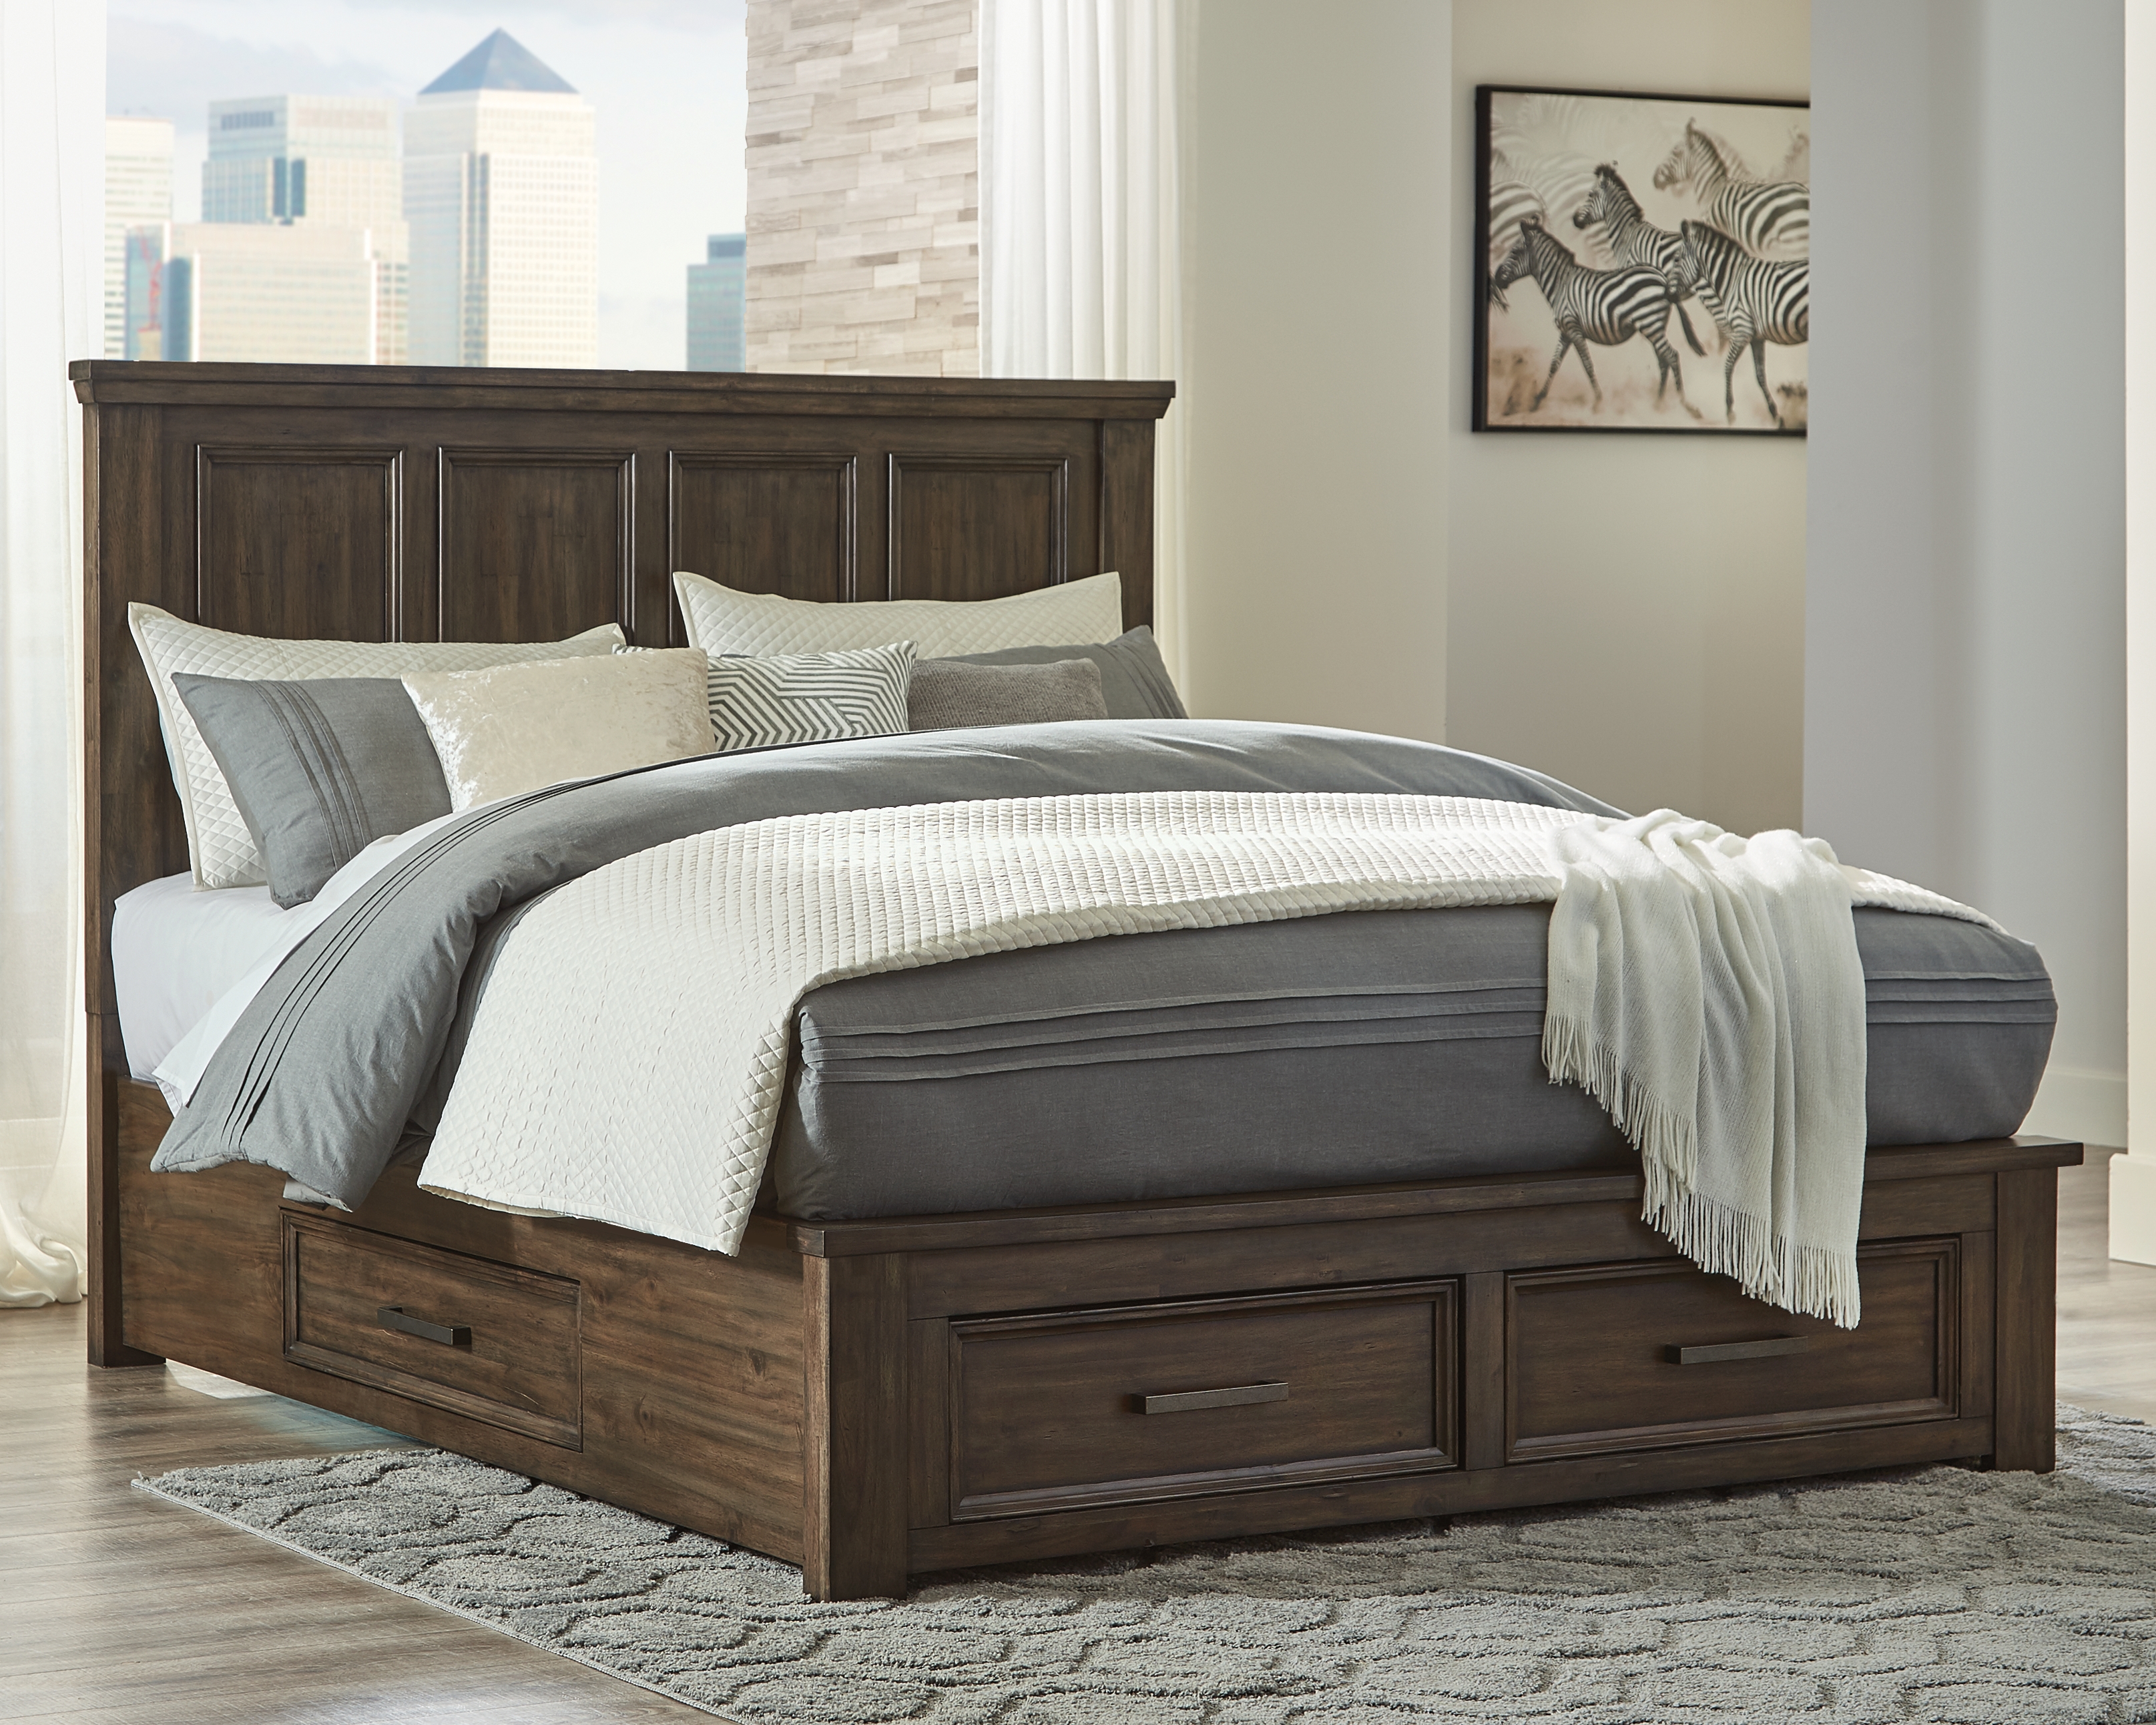 Johurst California King Panel Bed With, King Headboard And Footboard With Storage